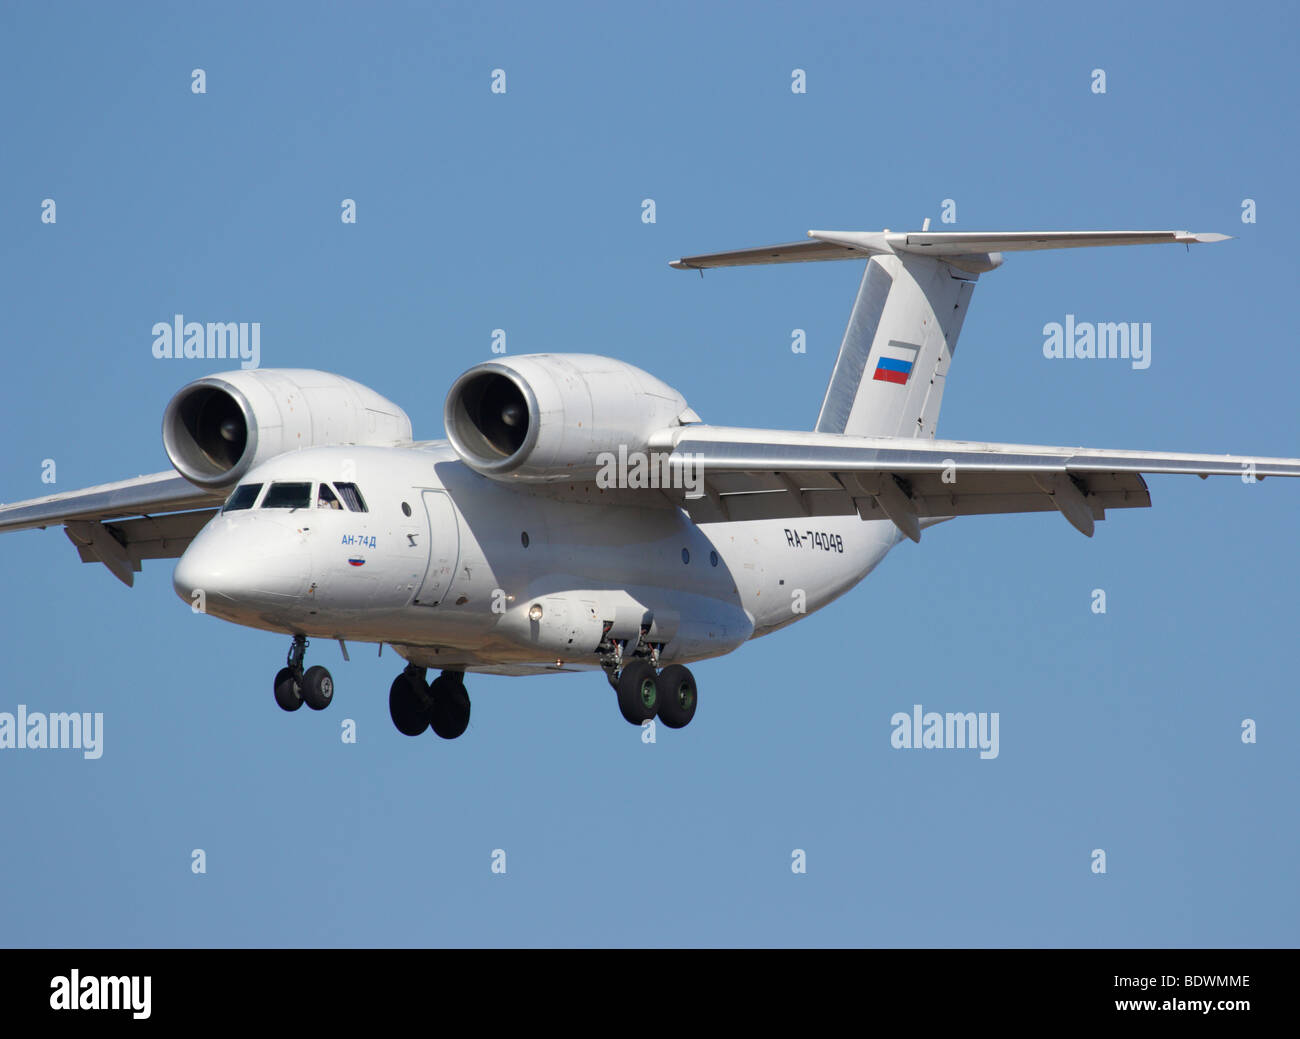 Antonov An-74 short takeoff and landing (STOL) cargo plane in front view, showing its unusual design configuration with overwing engines Stock Photo